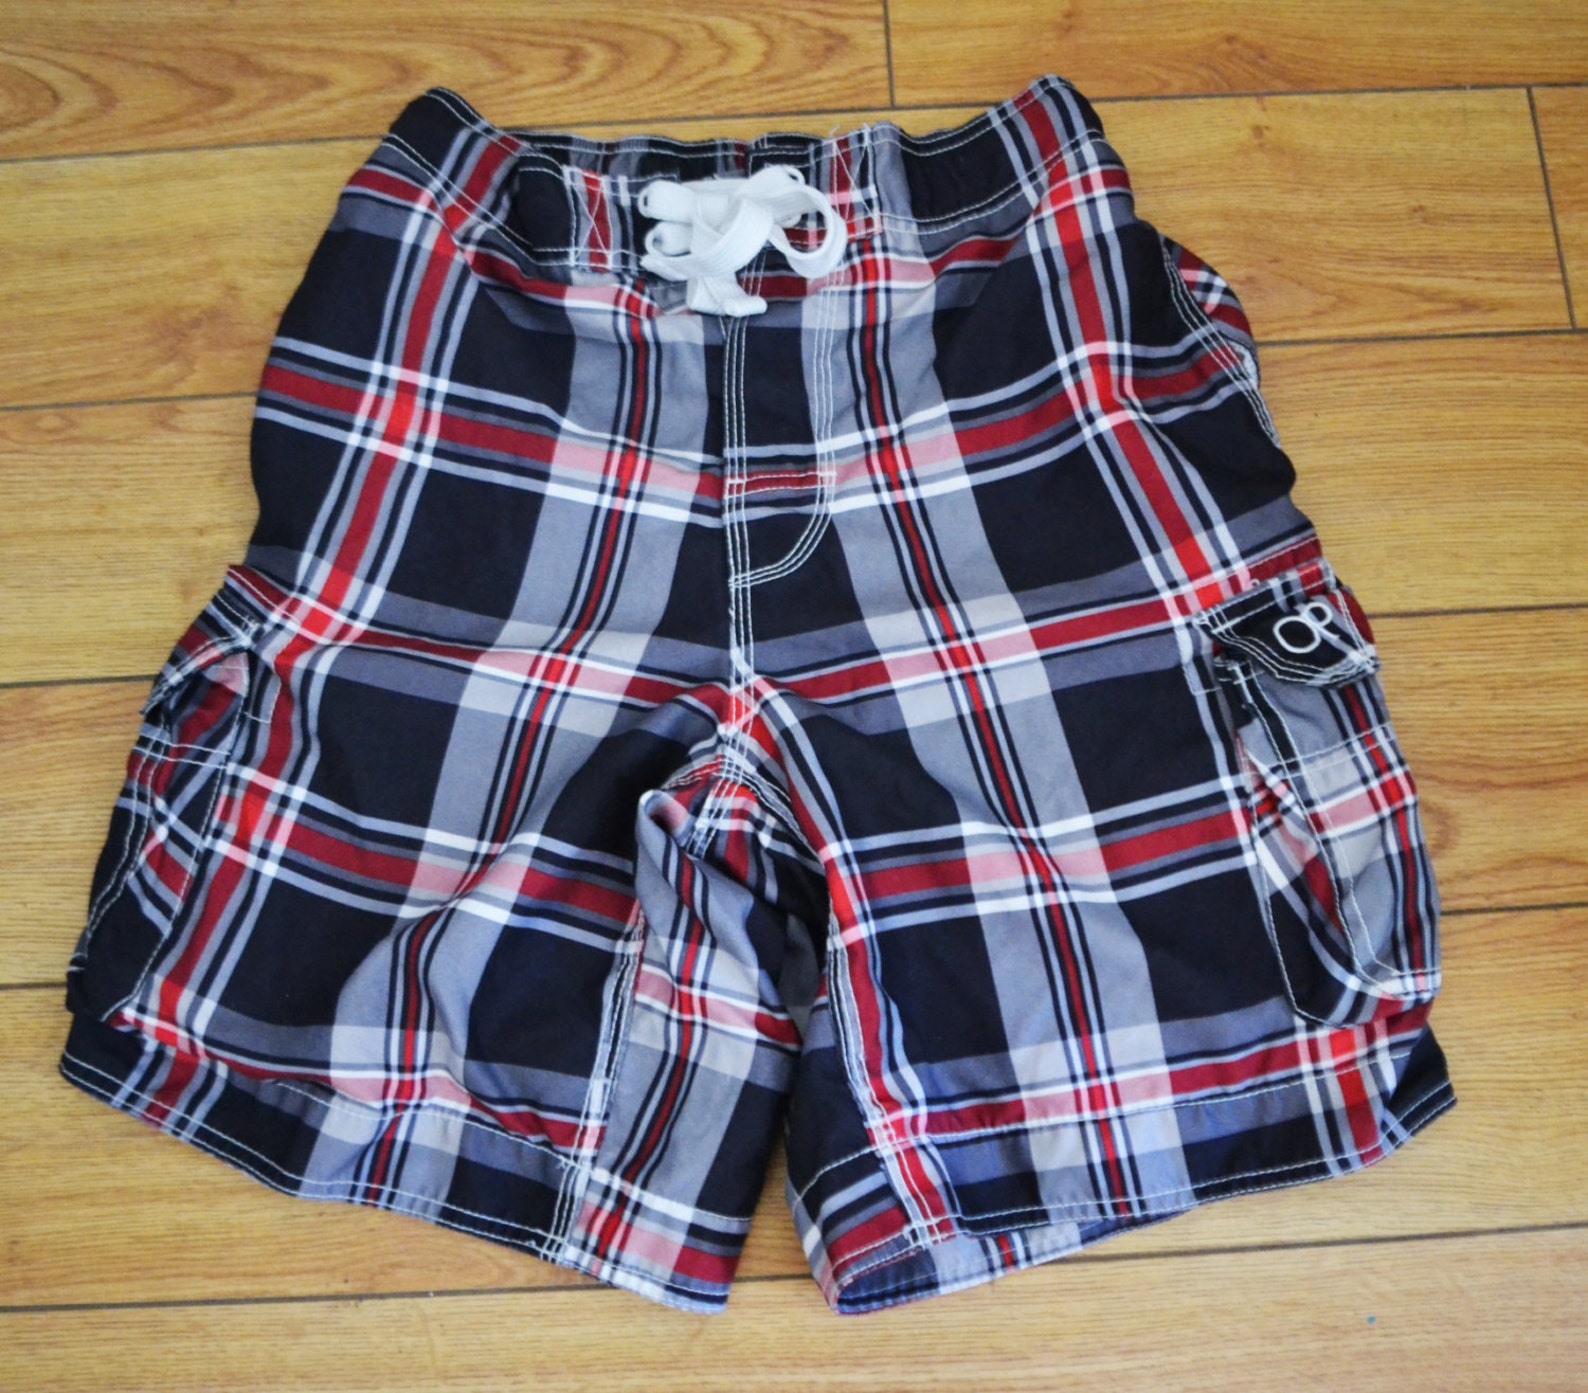 Shorts OP Red and Black Plaid Swim Board Surf Trunks Cargo - Etsy